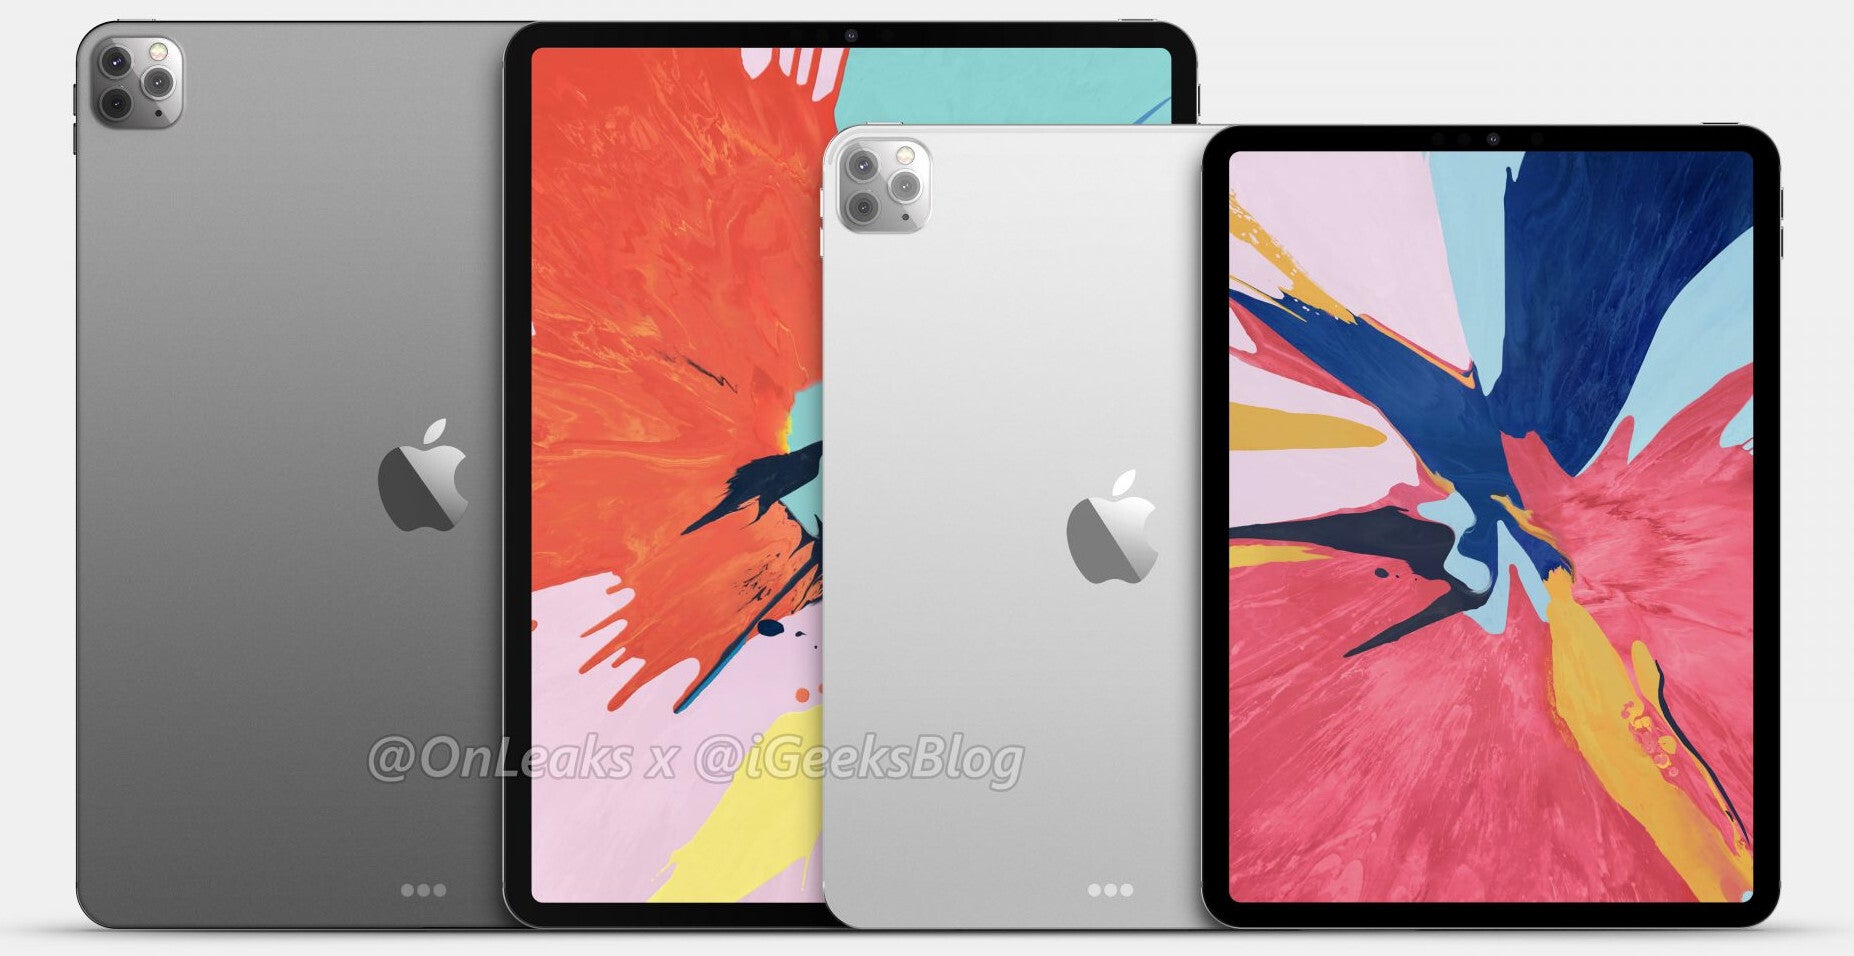 Alleged iPad Pro 2020 family - Here&#039;s what the Apple iPad Pro 2020 series (probably) looks like